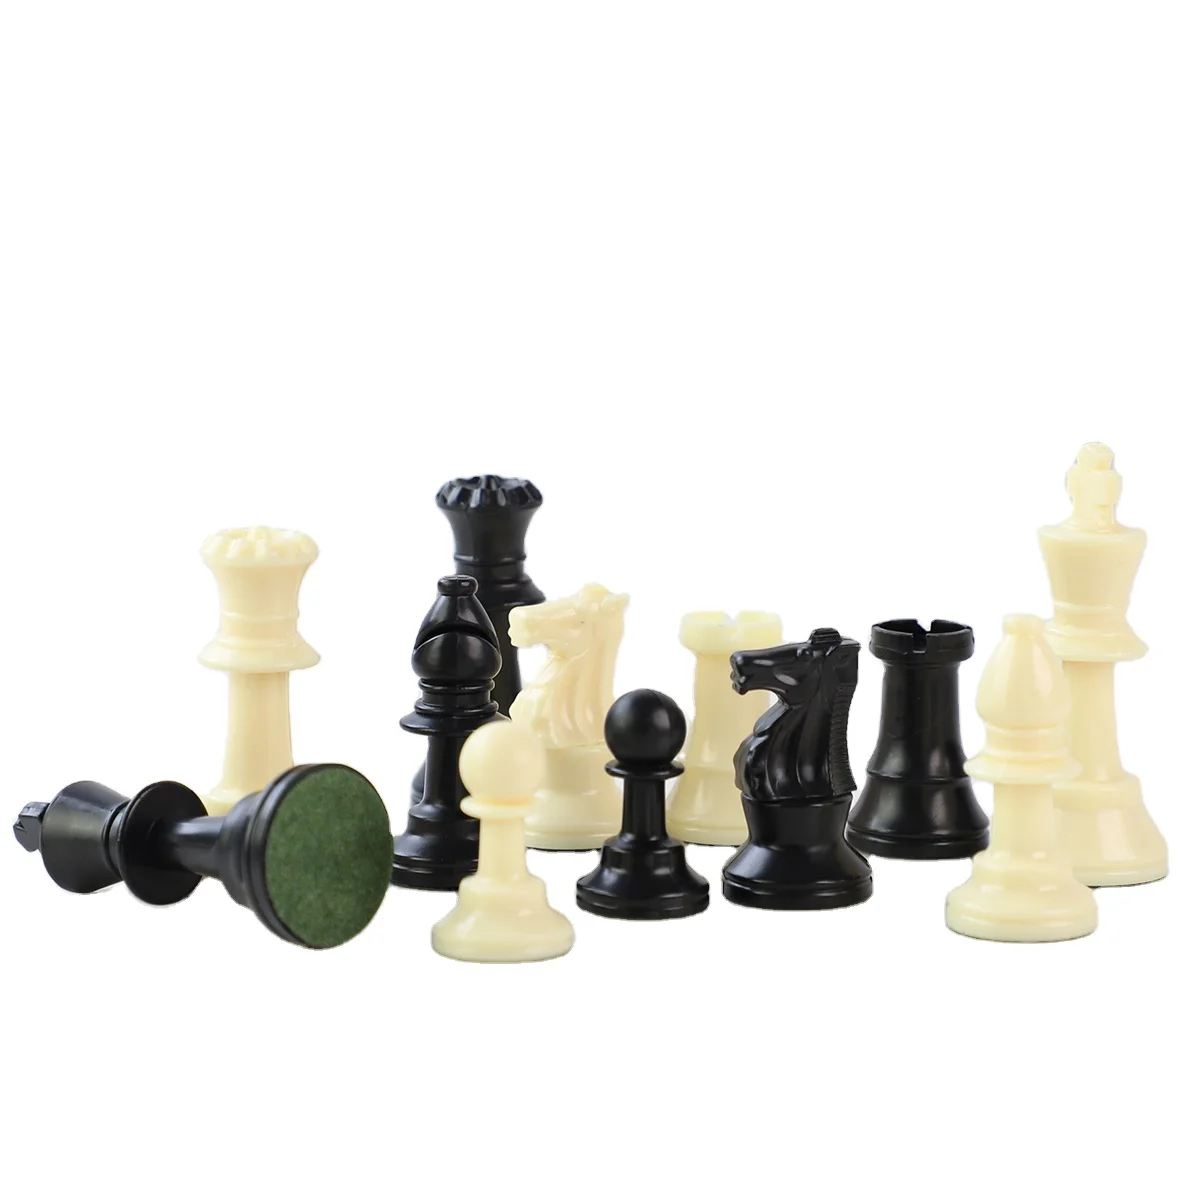 

Manufacturer selling sale chess pieces portable PS material 6.4 cm king height small chess pieces manufacturers